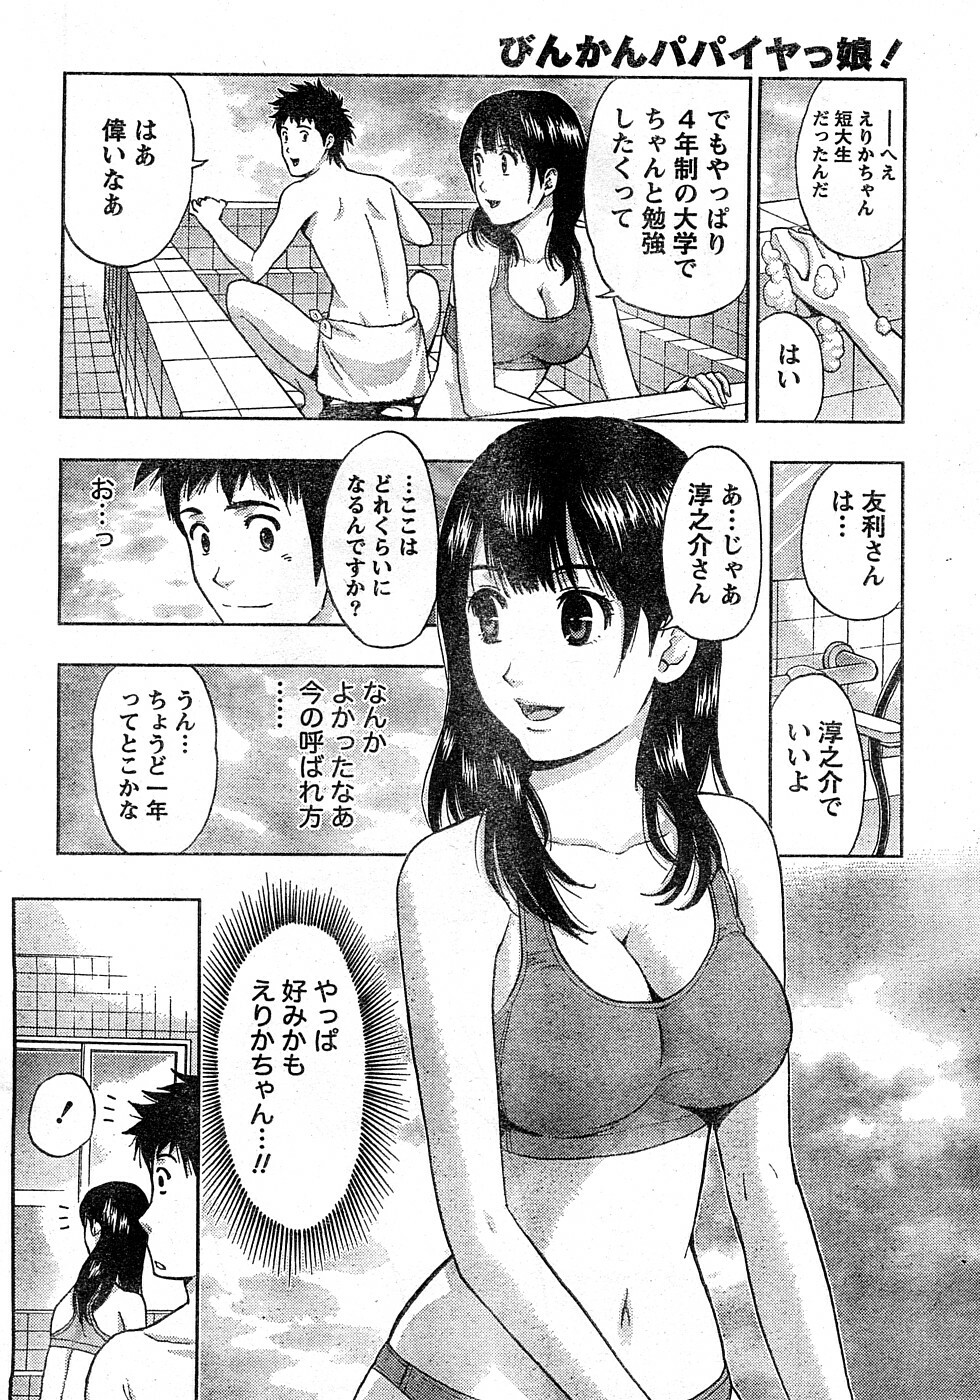 Monthly Vitaman 2009-02 [Incomplete] page 17 full